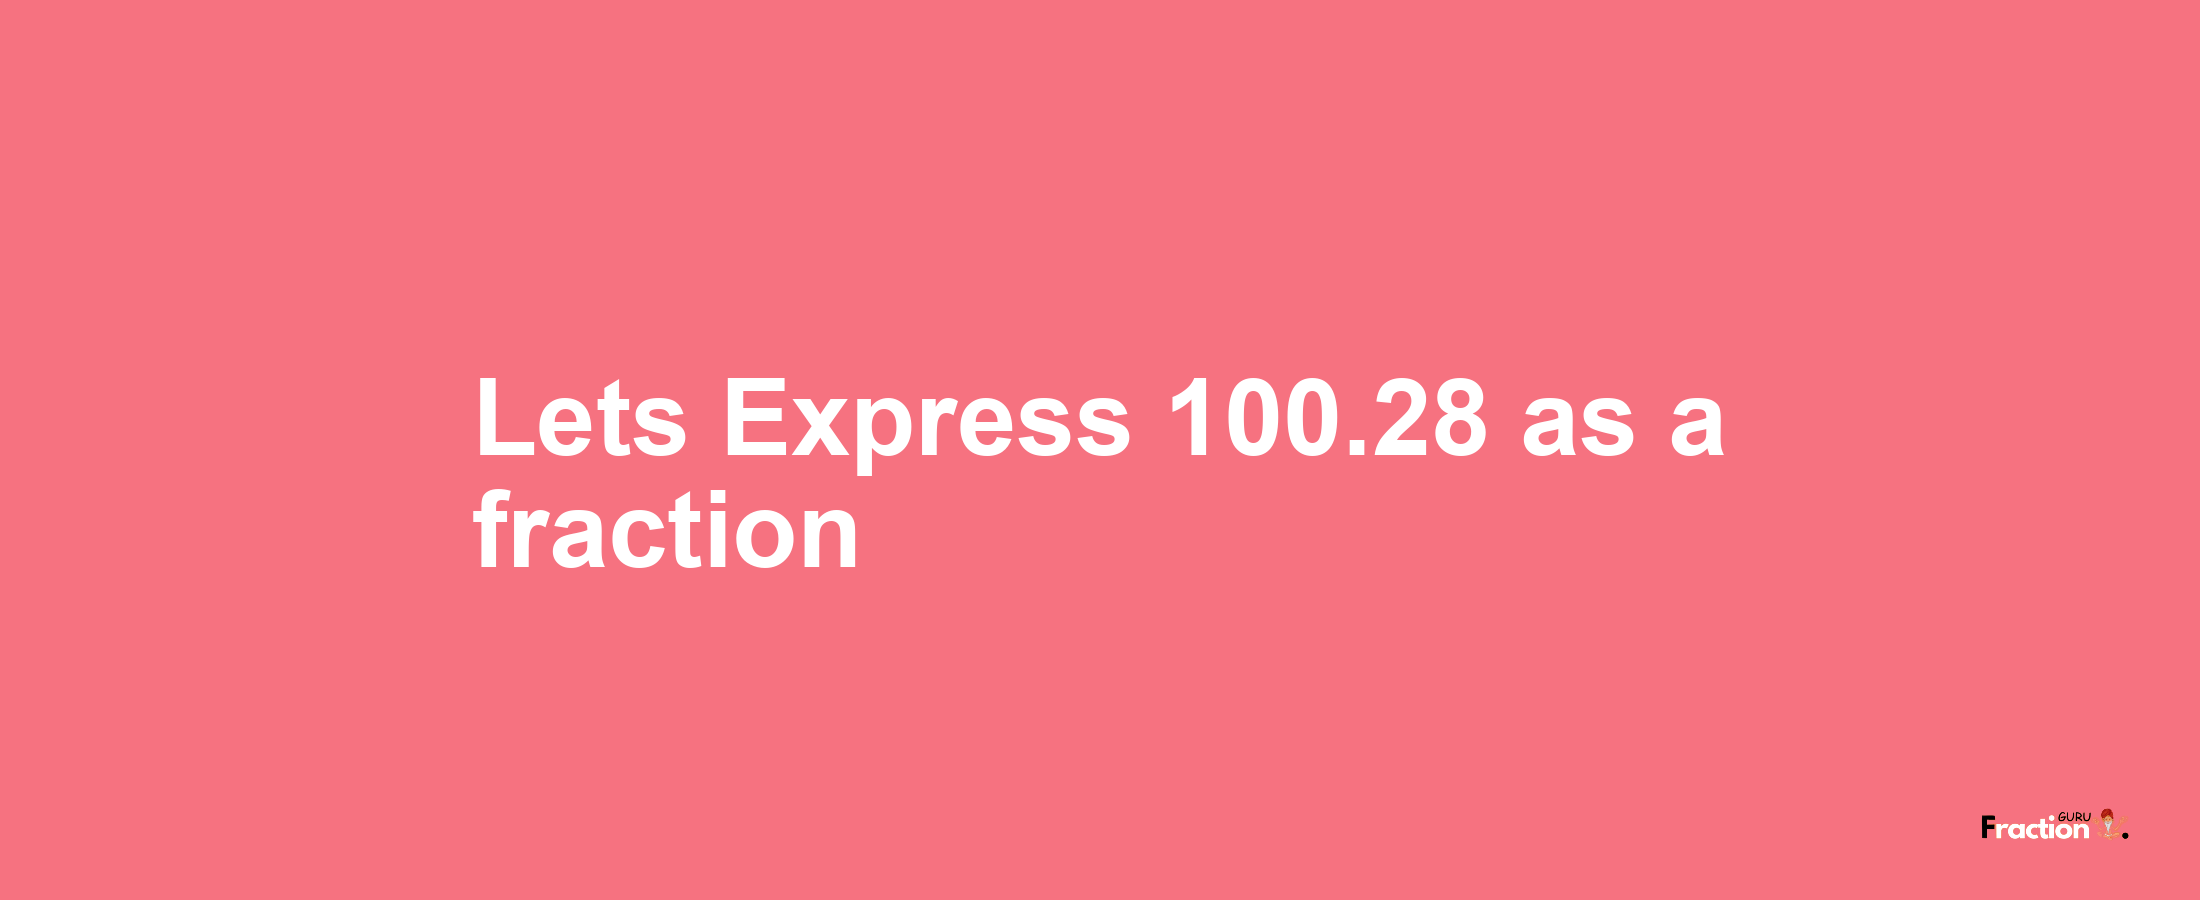 Lets Express 100.28 as afraction